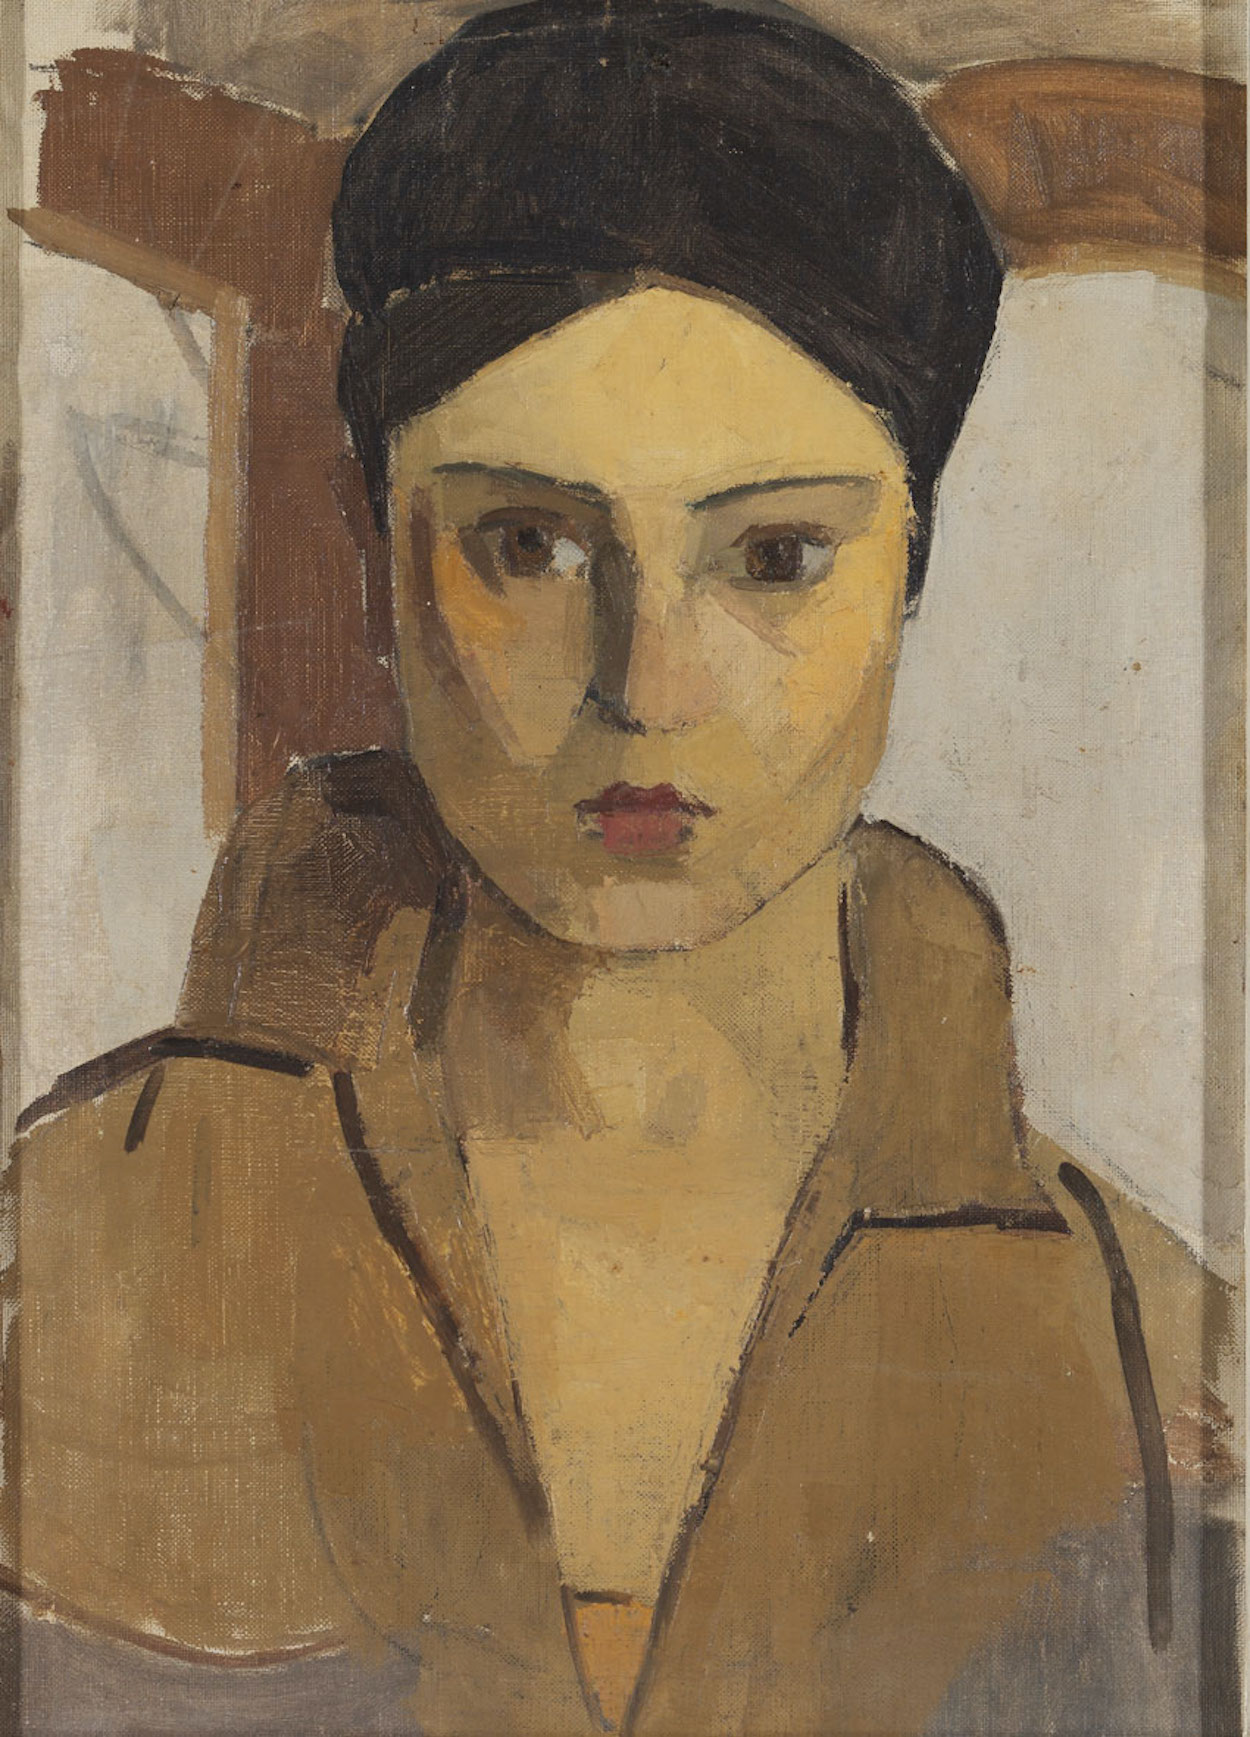 Self-portrait by Hale Asaf - 1920s - 90 x 72 cm private collection